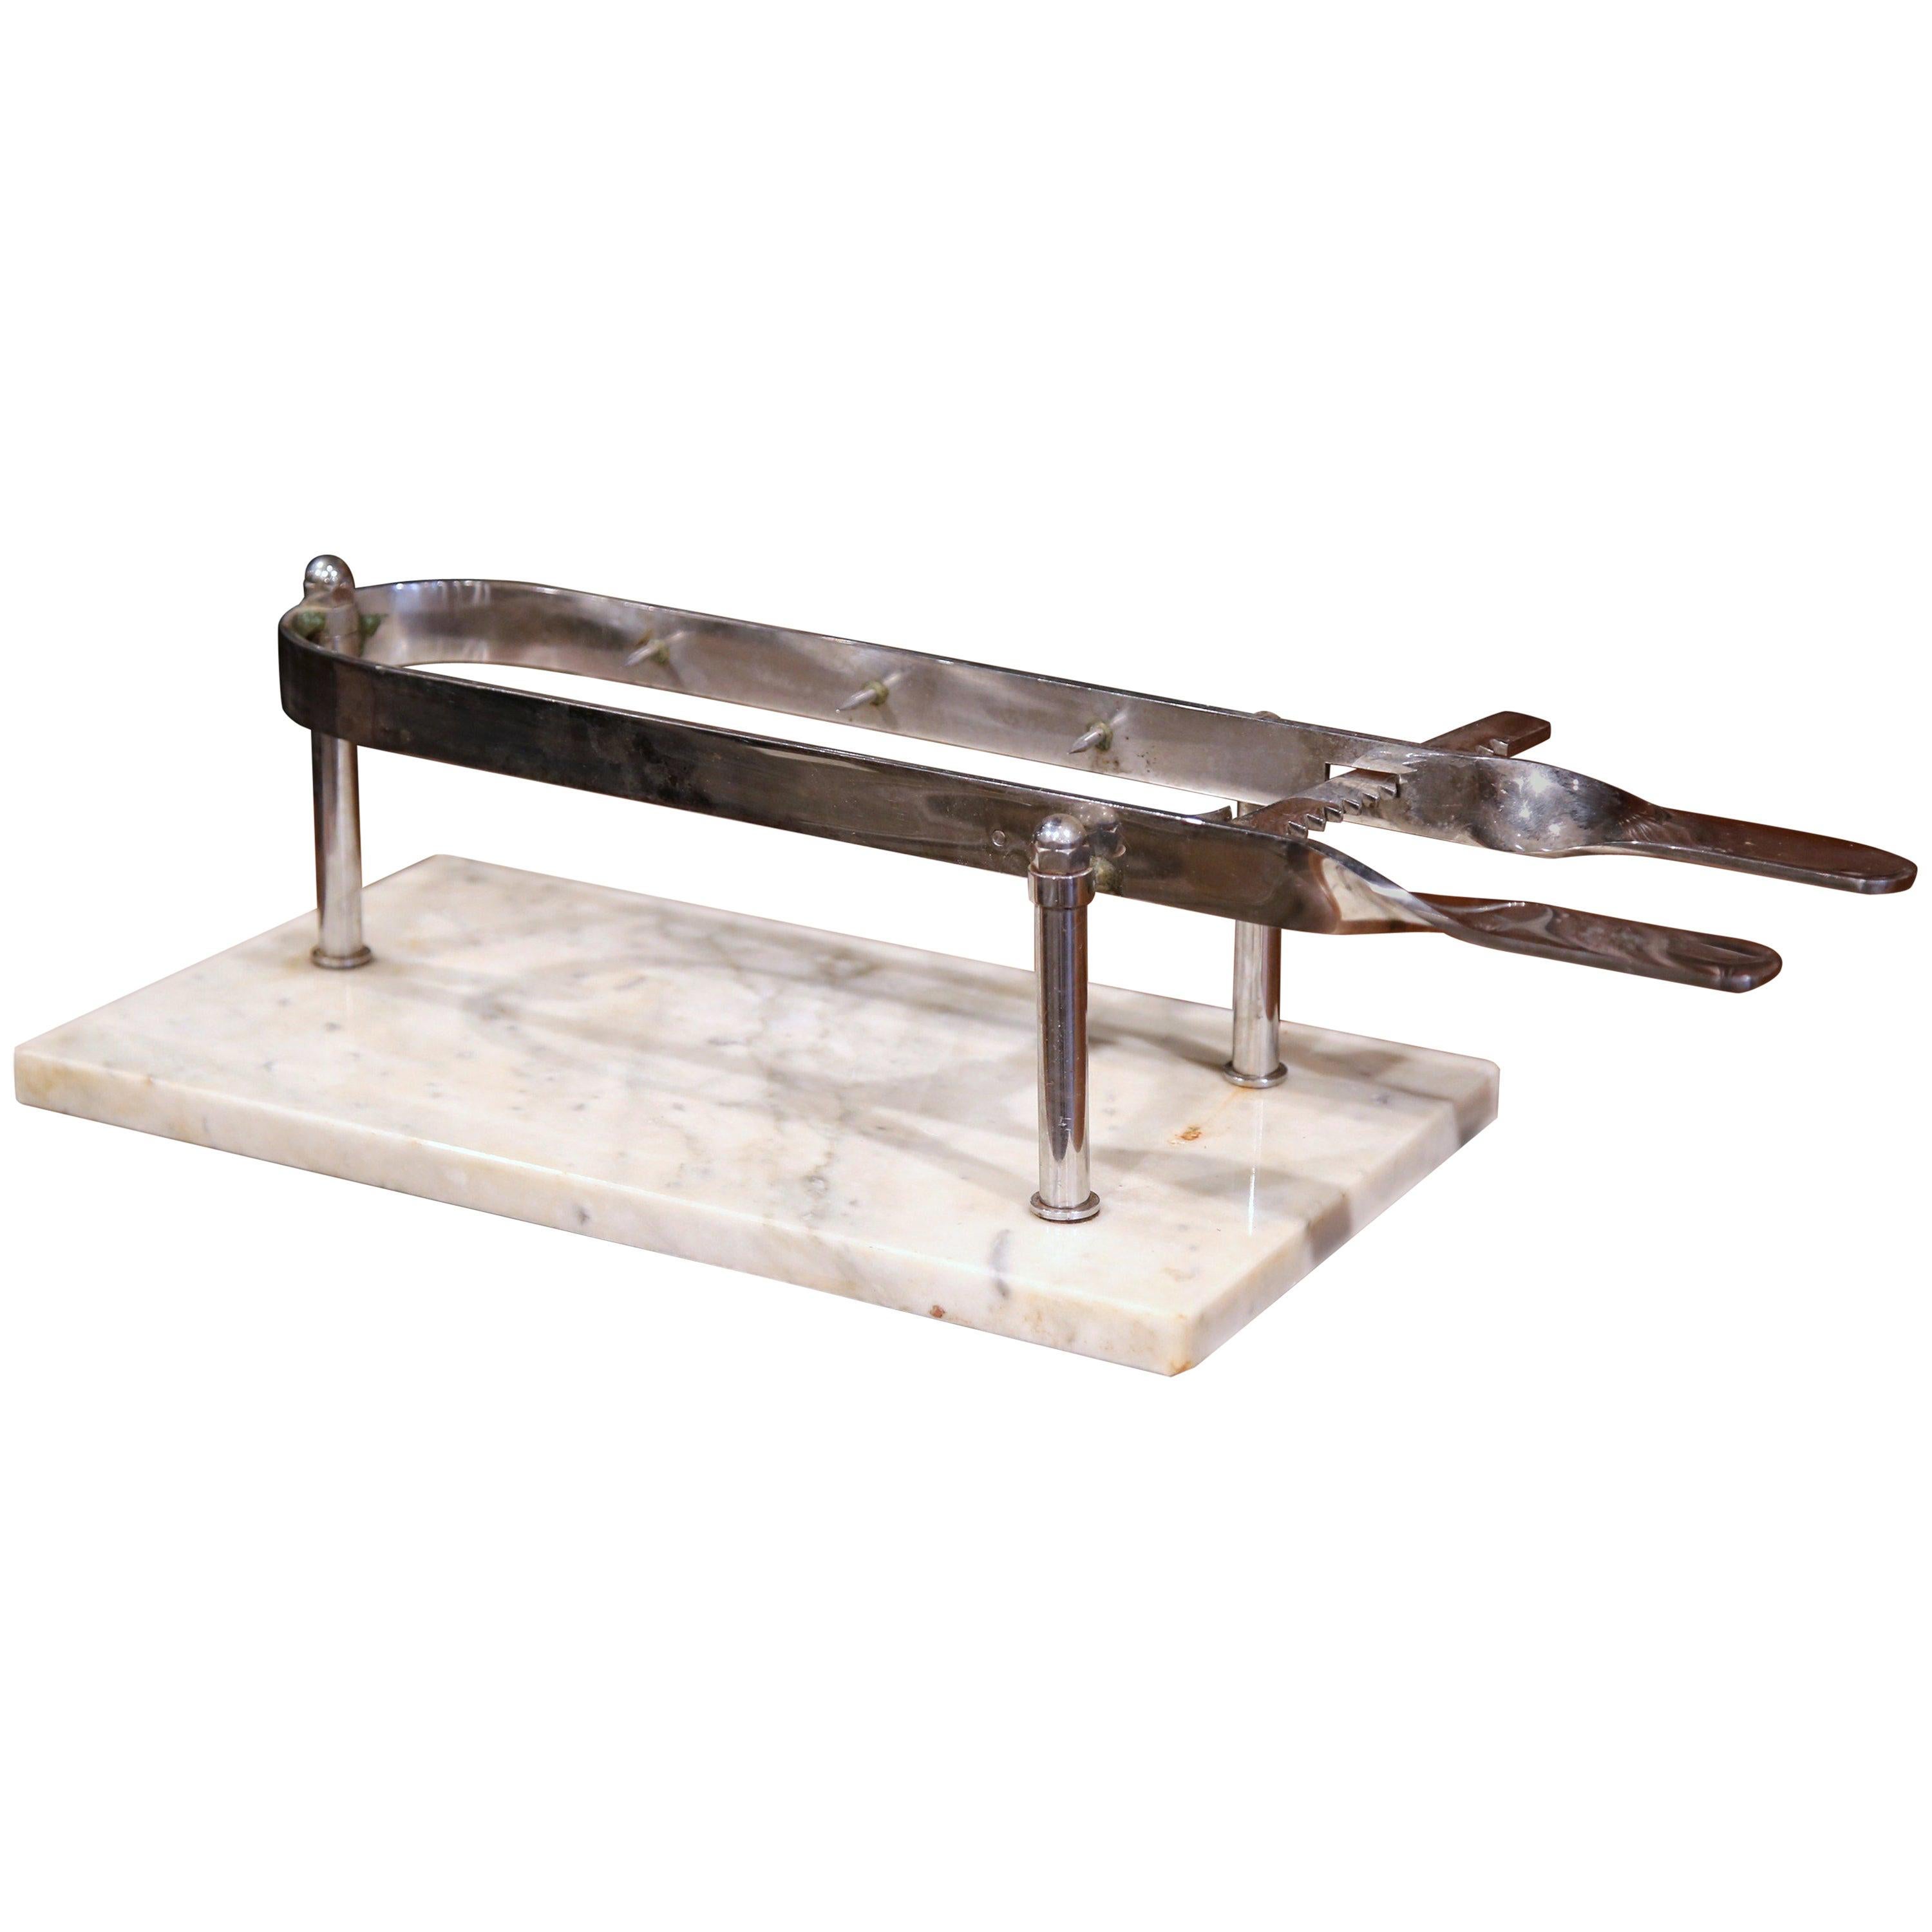 Early 20th Century French Stainless Steel and Marble Butcher Meat Holder